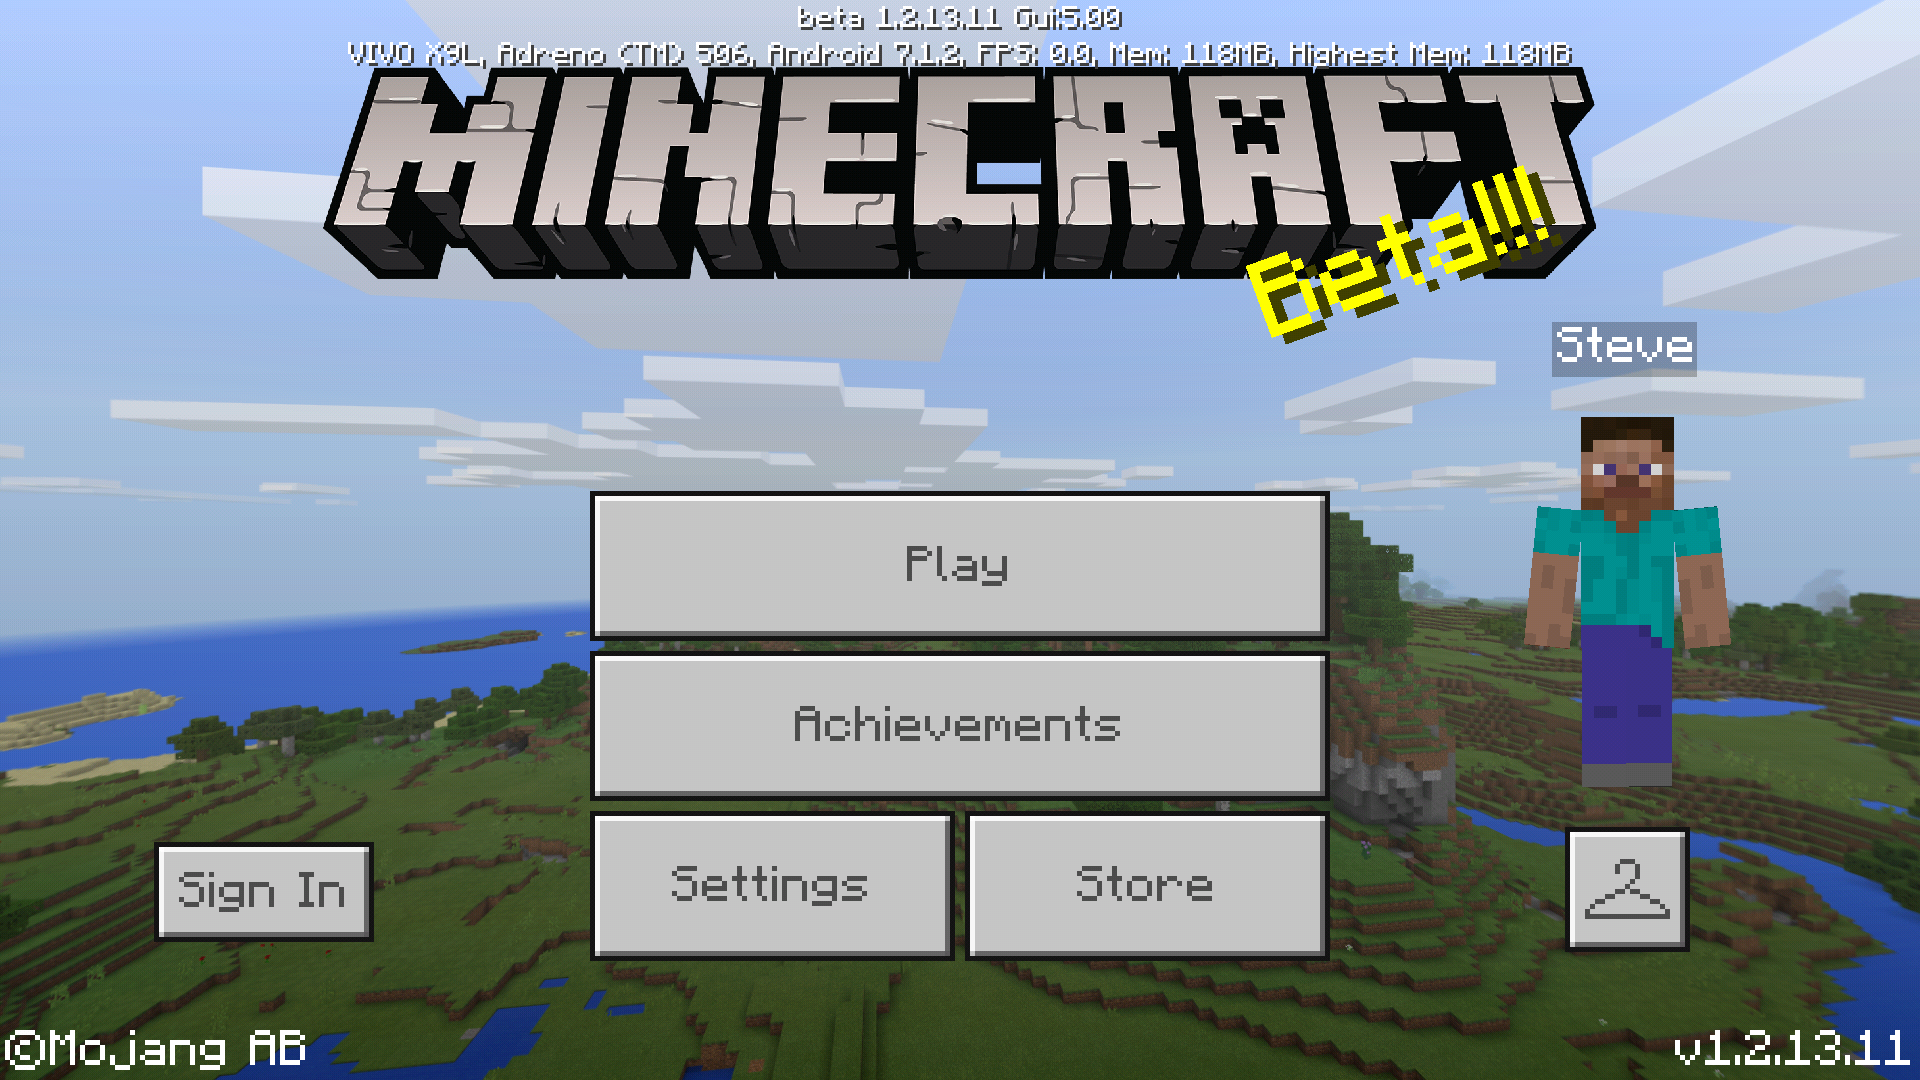 Download Minecraft PE 1.18.0.25 for Android